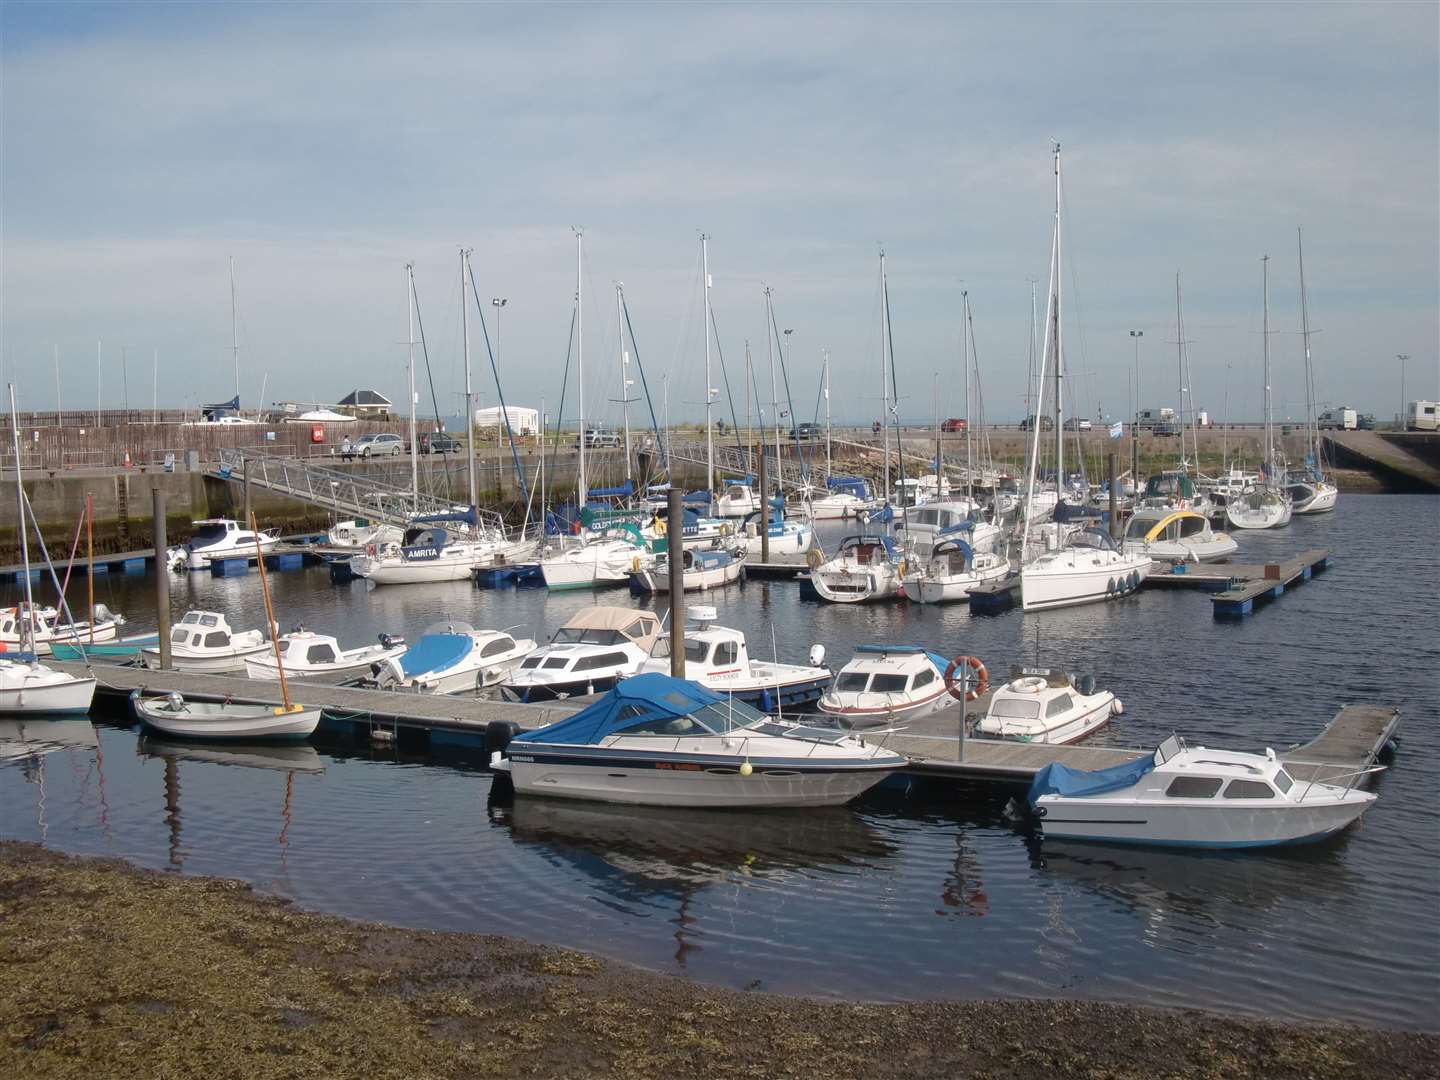 Boats in Nairn harbour.